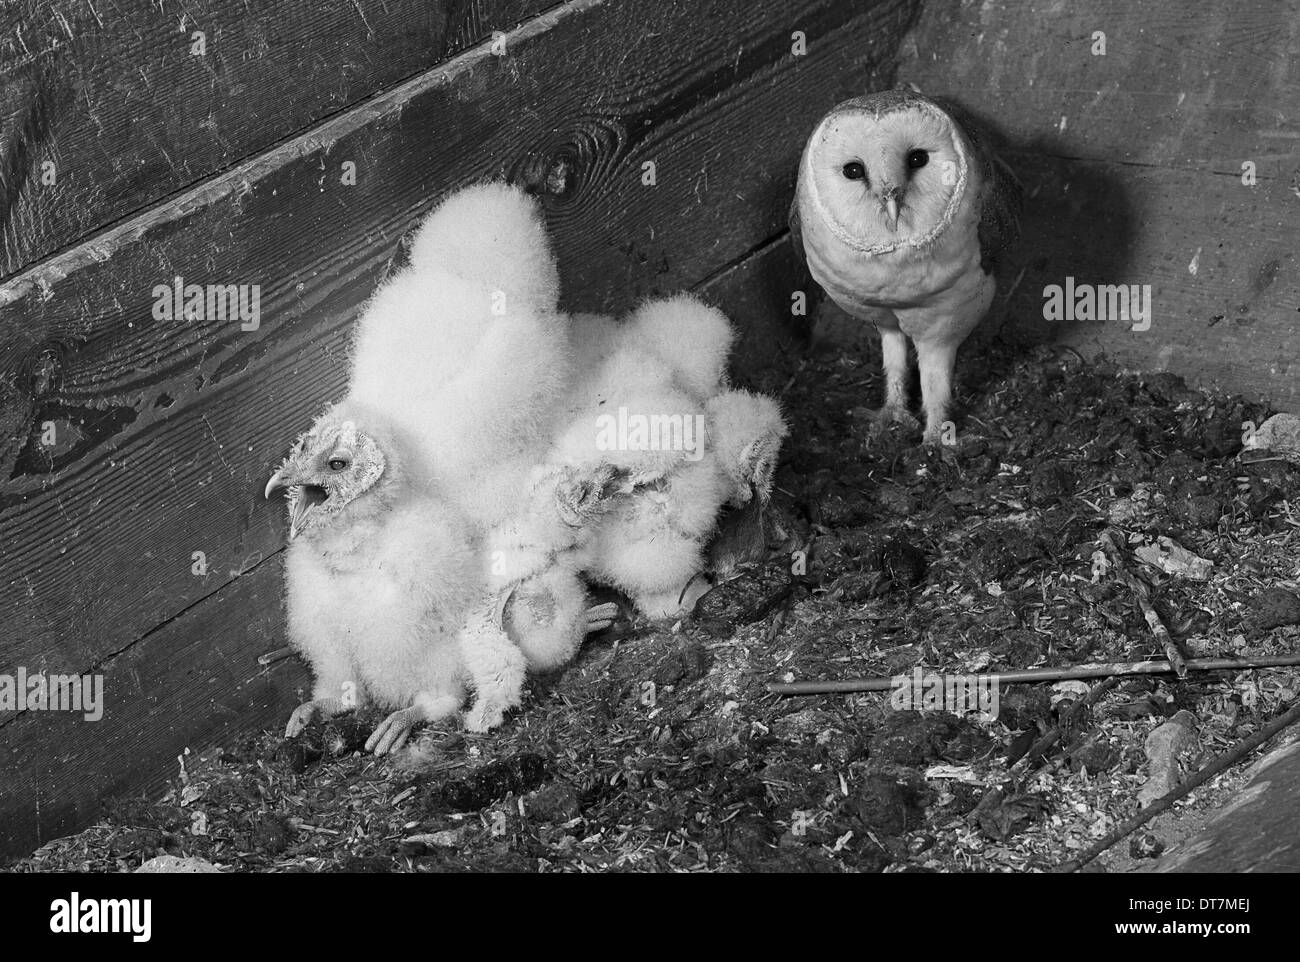 Barn Owl with young in grain hopper Chillesford Suffolk 1949 by Eric Hosking. An early Electronic flash unit was used to take Stock Photo